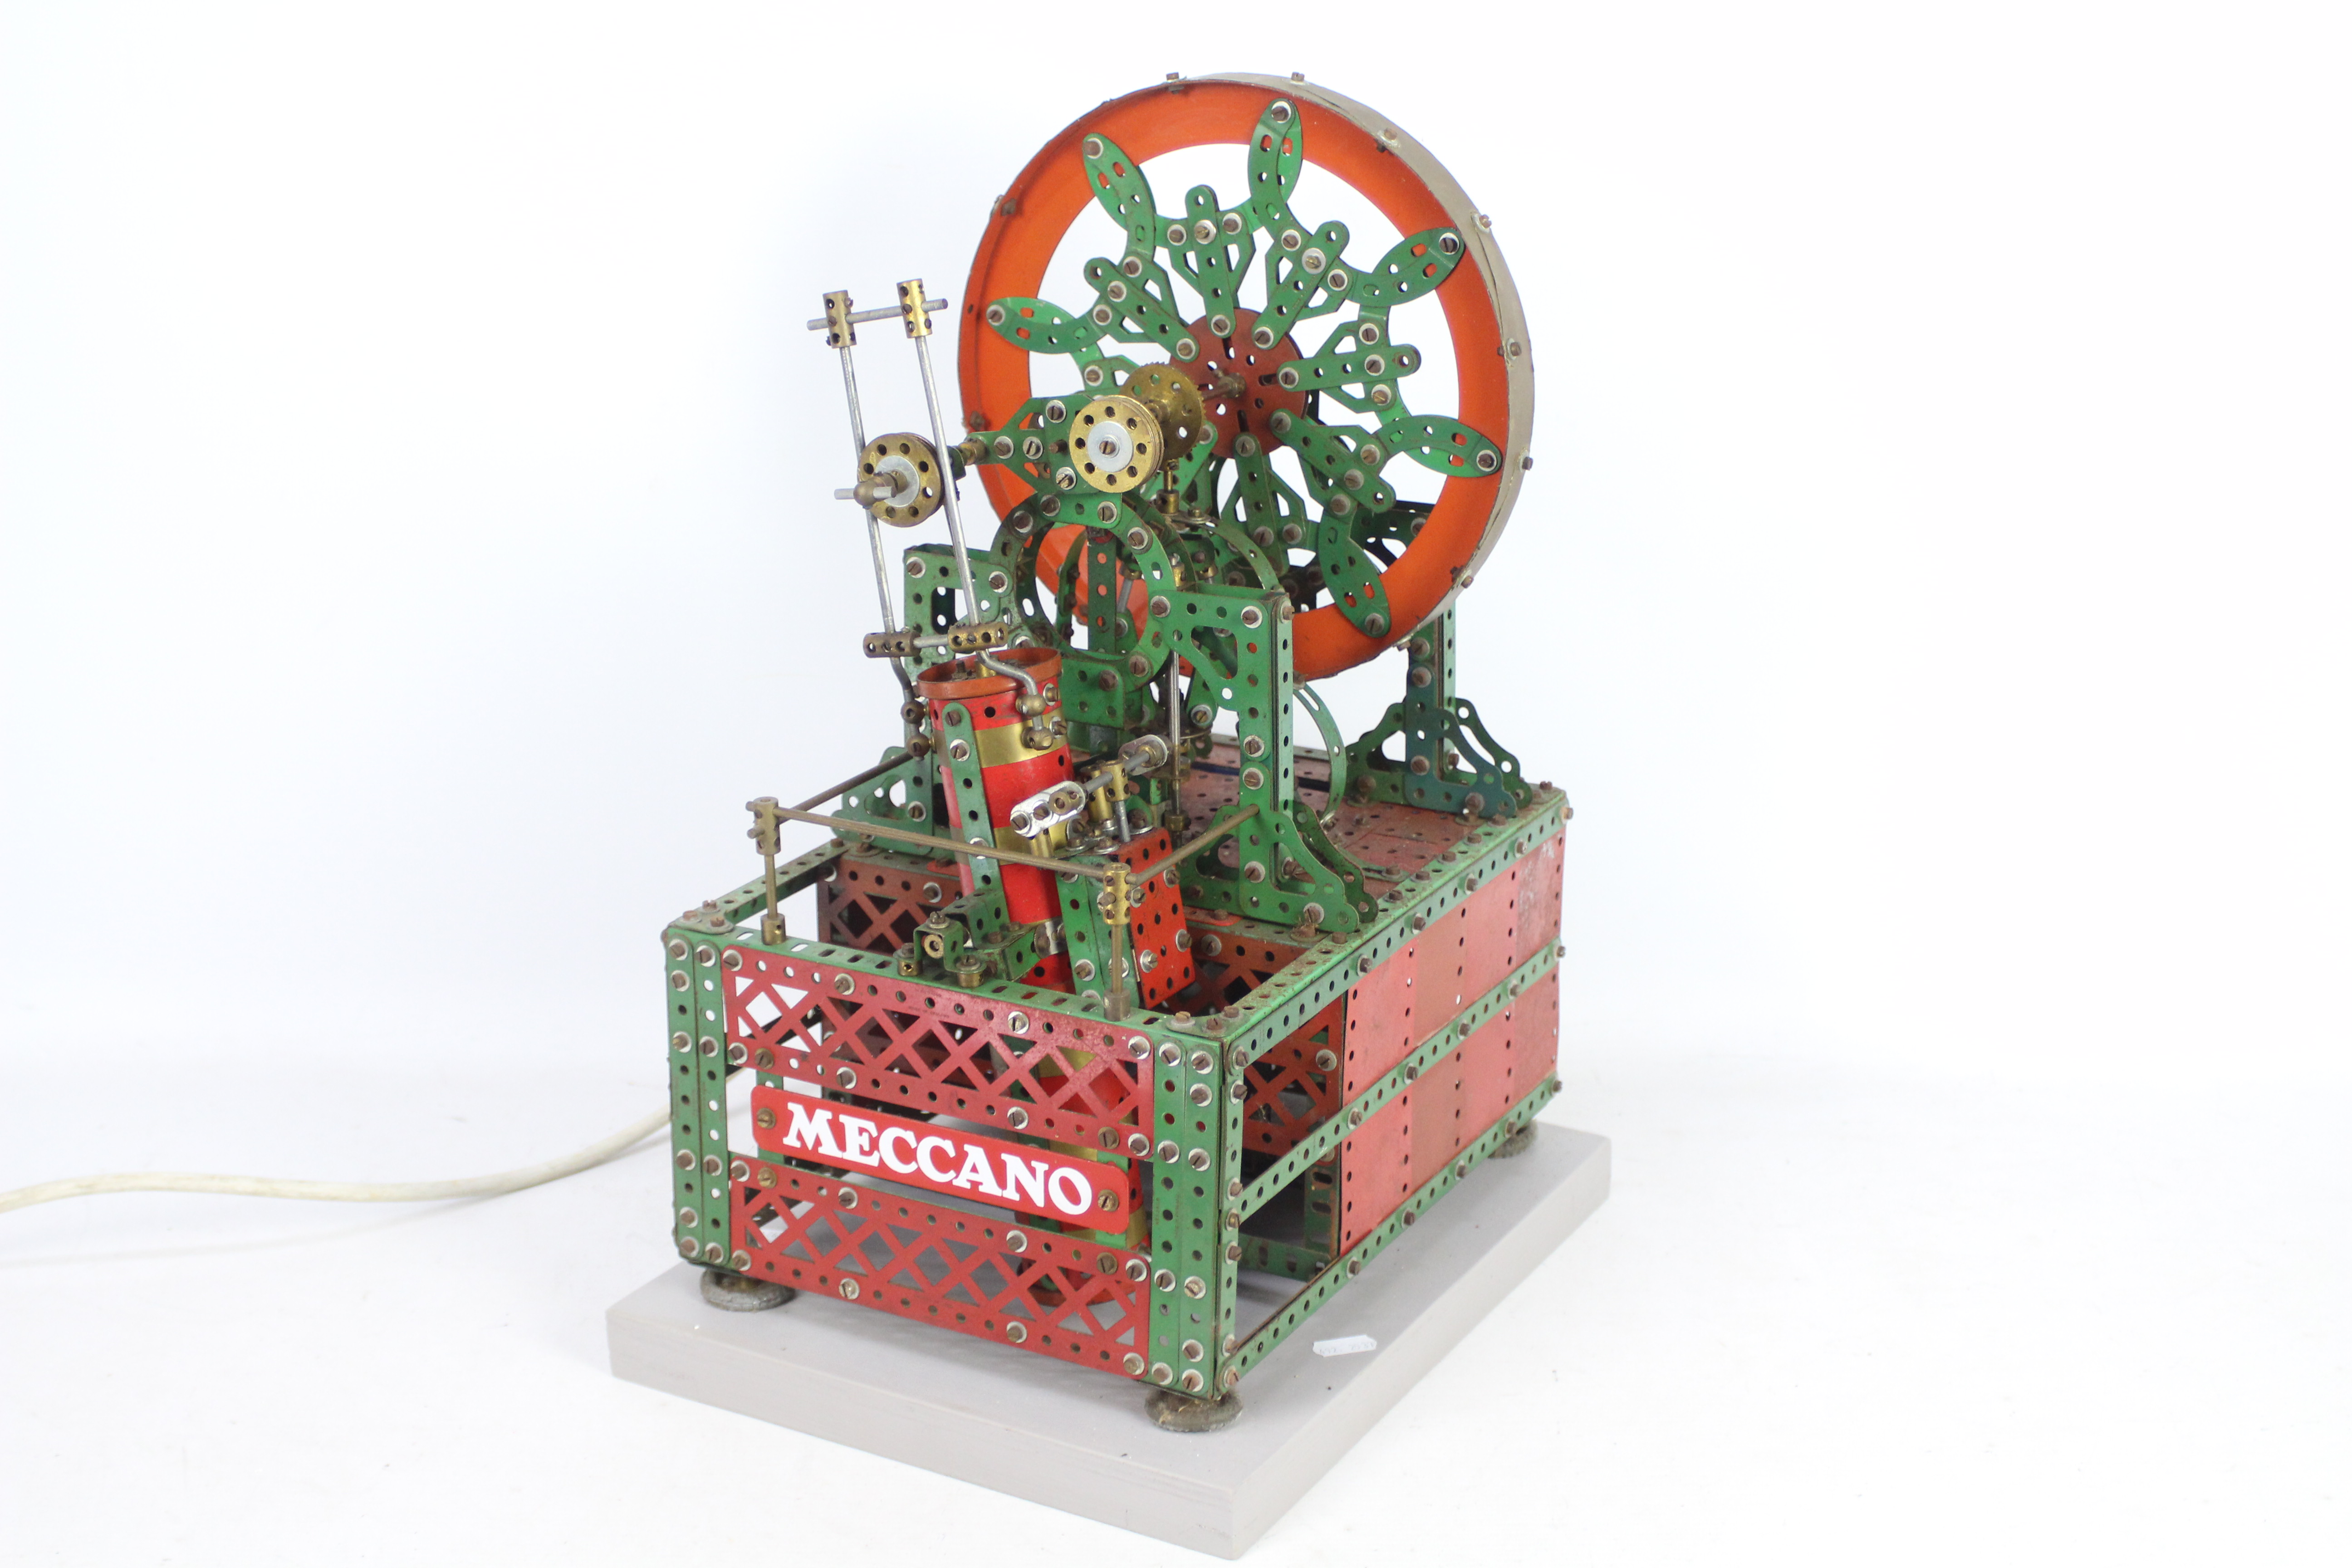 Meccano - A vintage red and green Meccano shop display model of a Decorative Wheel.